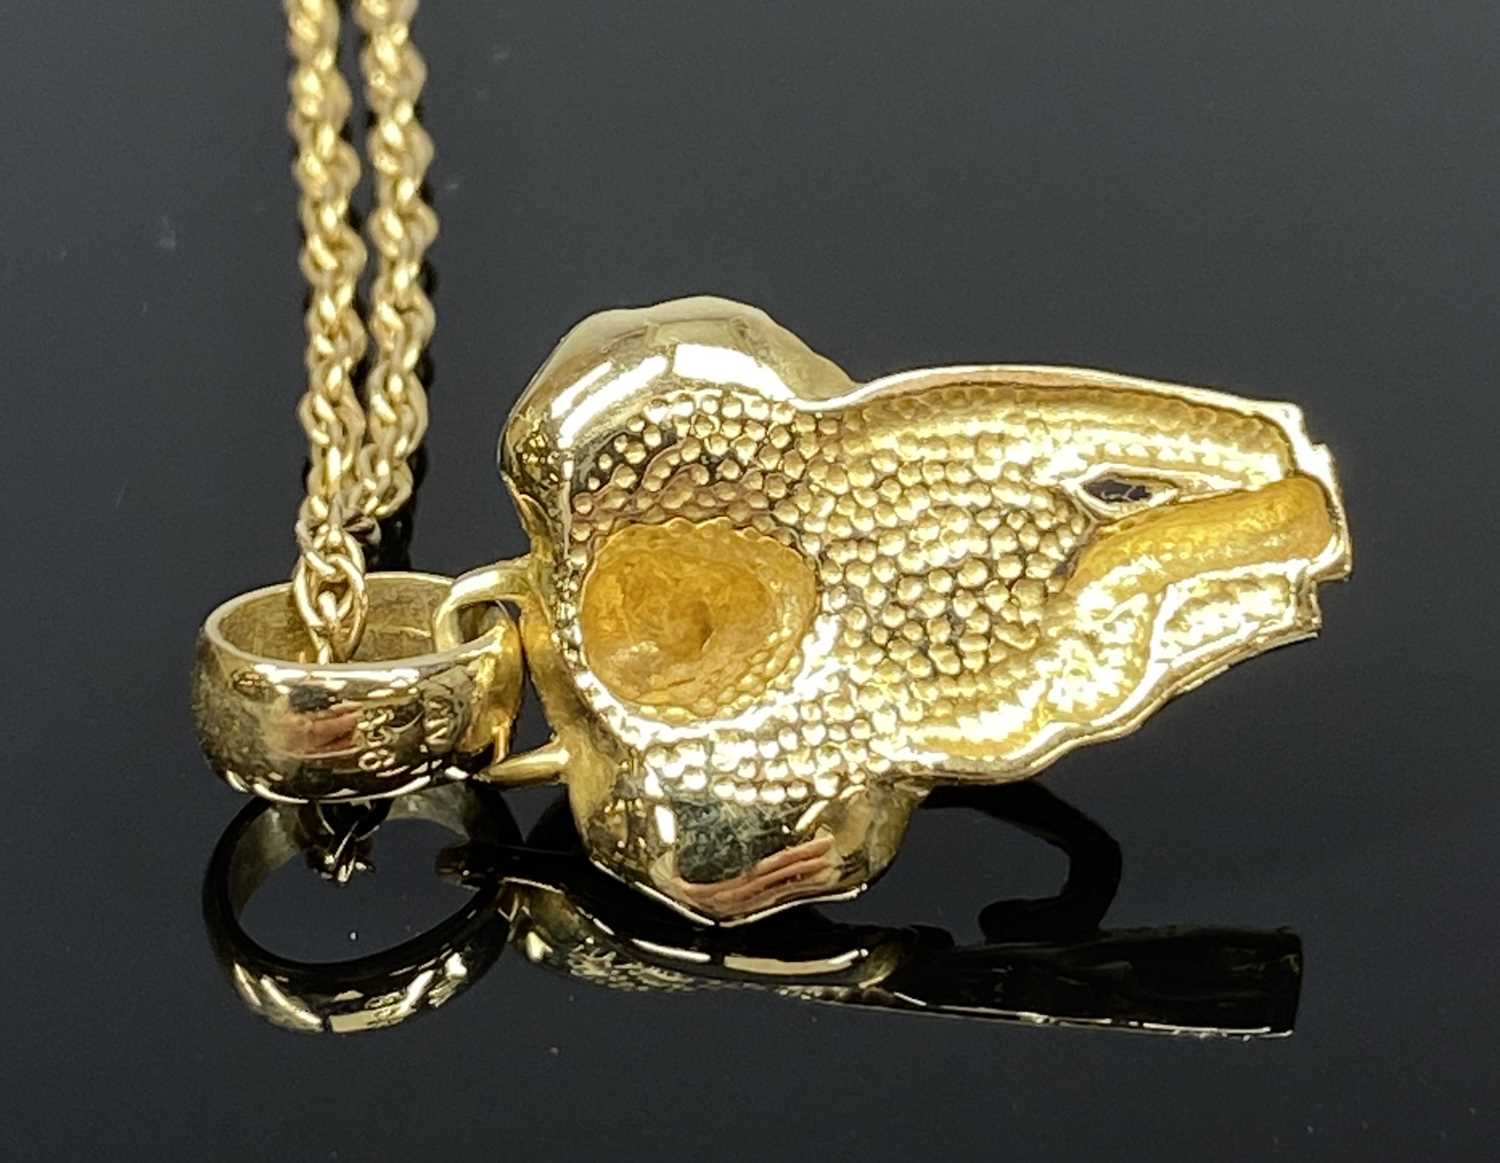 9CT GOLD ELEPHANT PENDANT NECKLACE, 3cms (l) including jump ring the pendant, 25.5cms (overall), 7. - Image 4 of 4